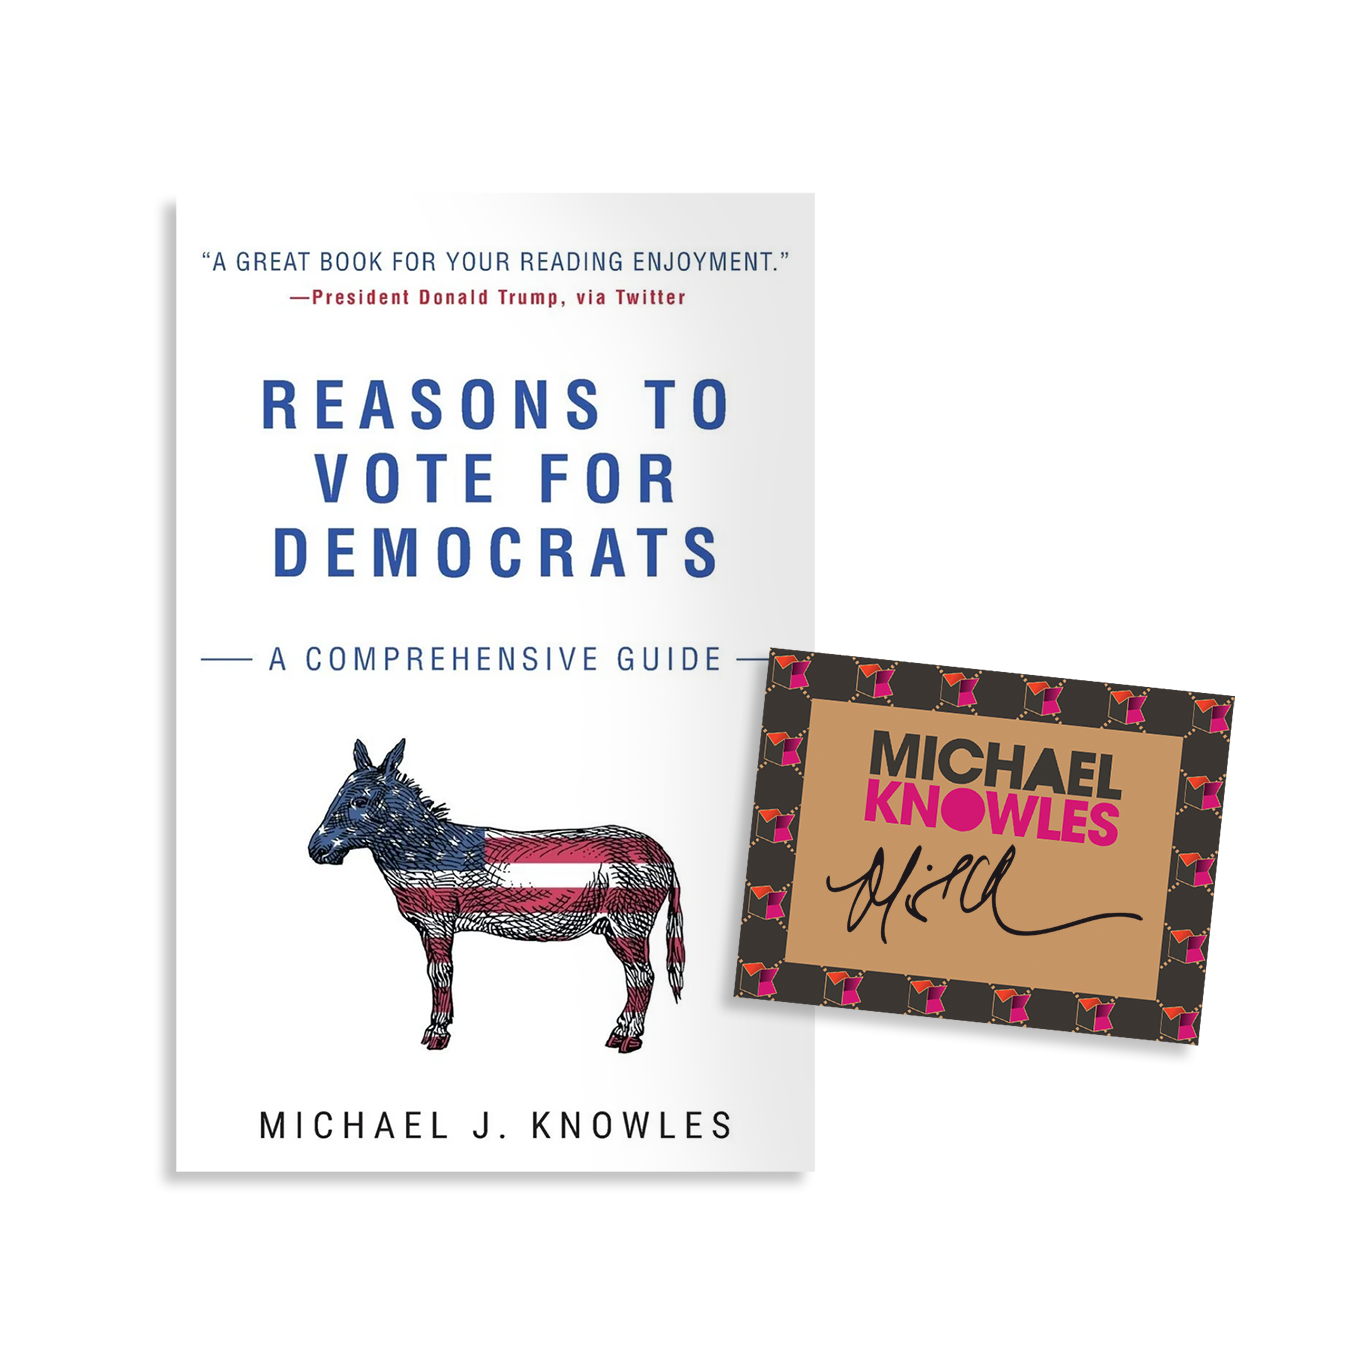 Reasons to Vote for Democrats: A Comprehensive Guide by Michael Knowles